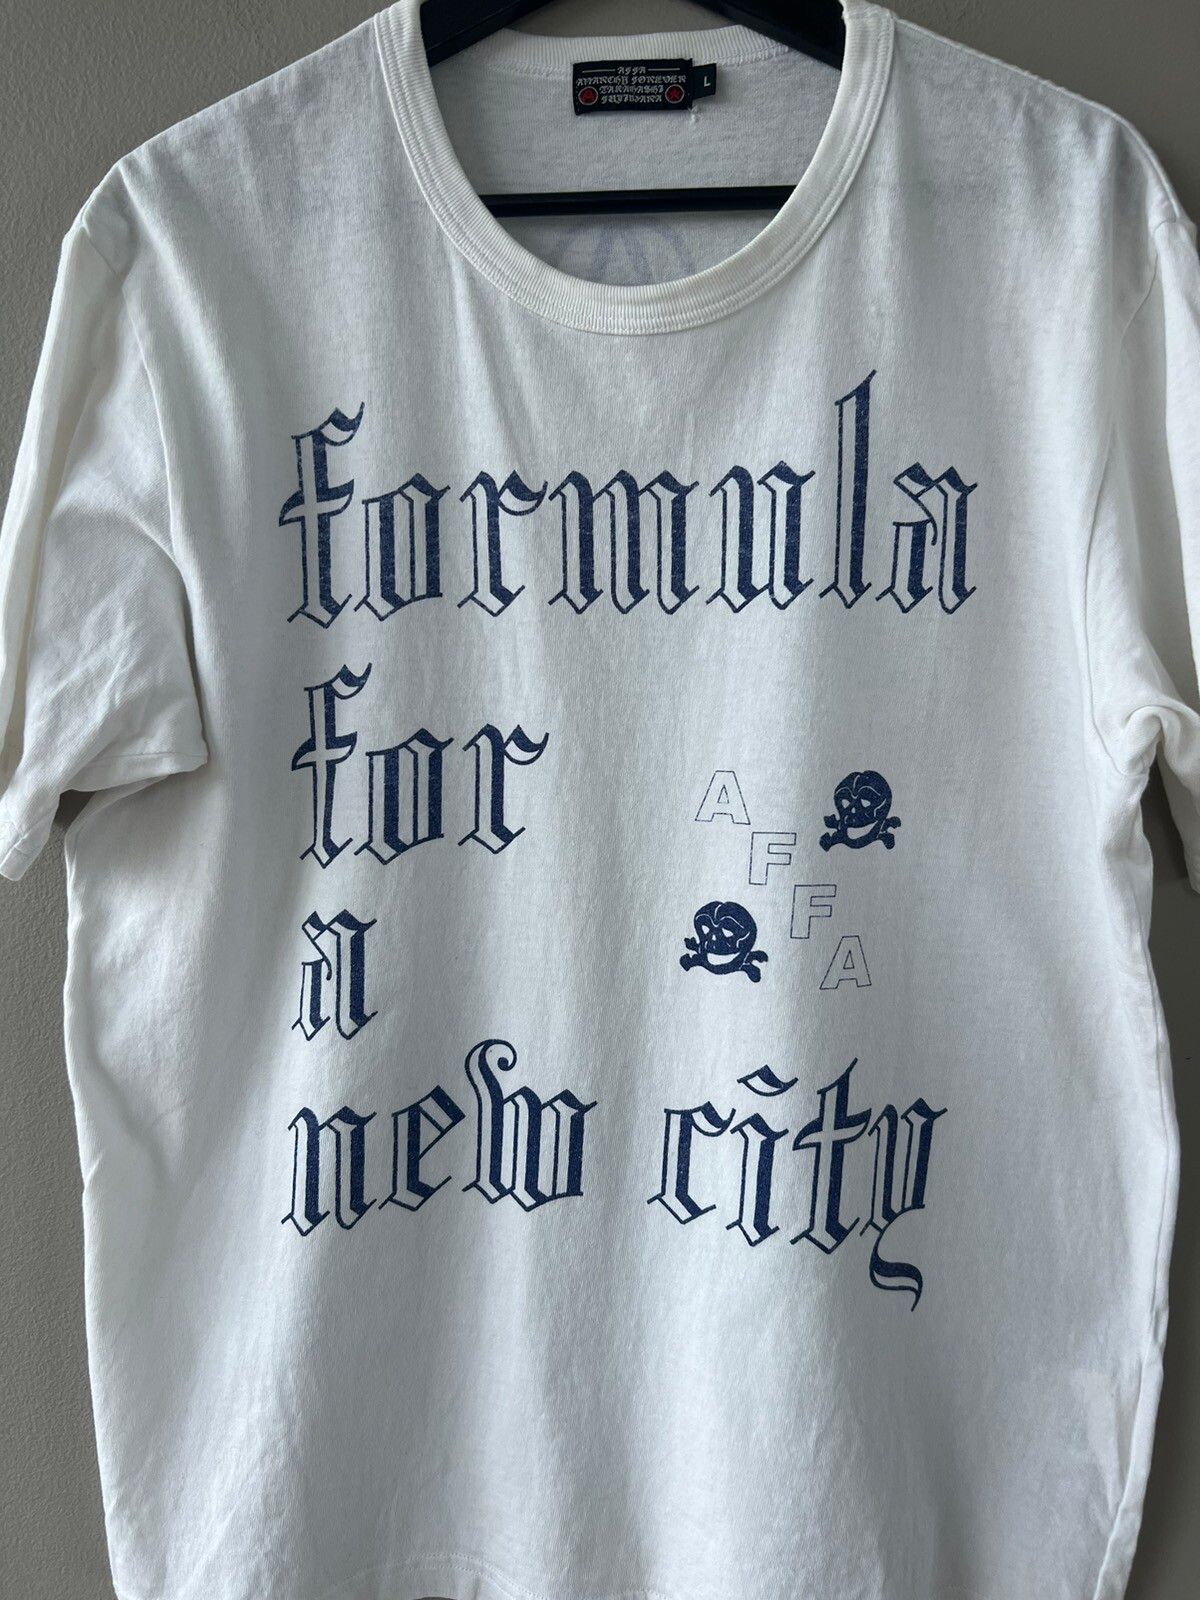 AW07 “Formula for a New City” Tee - 2